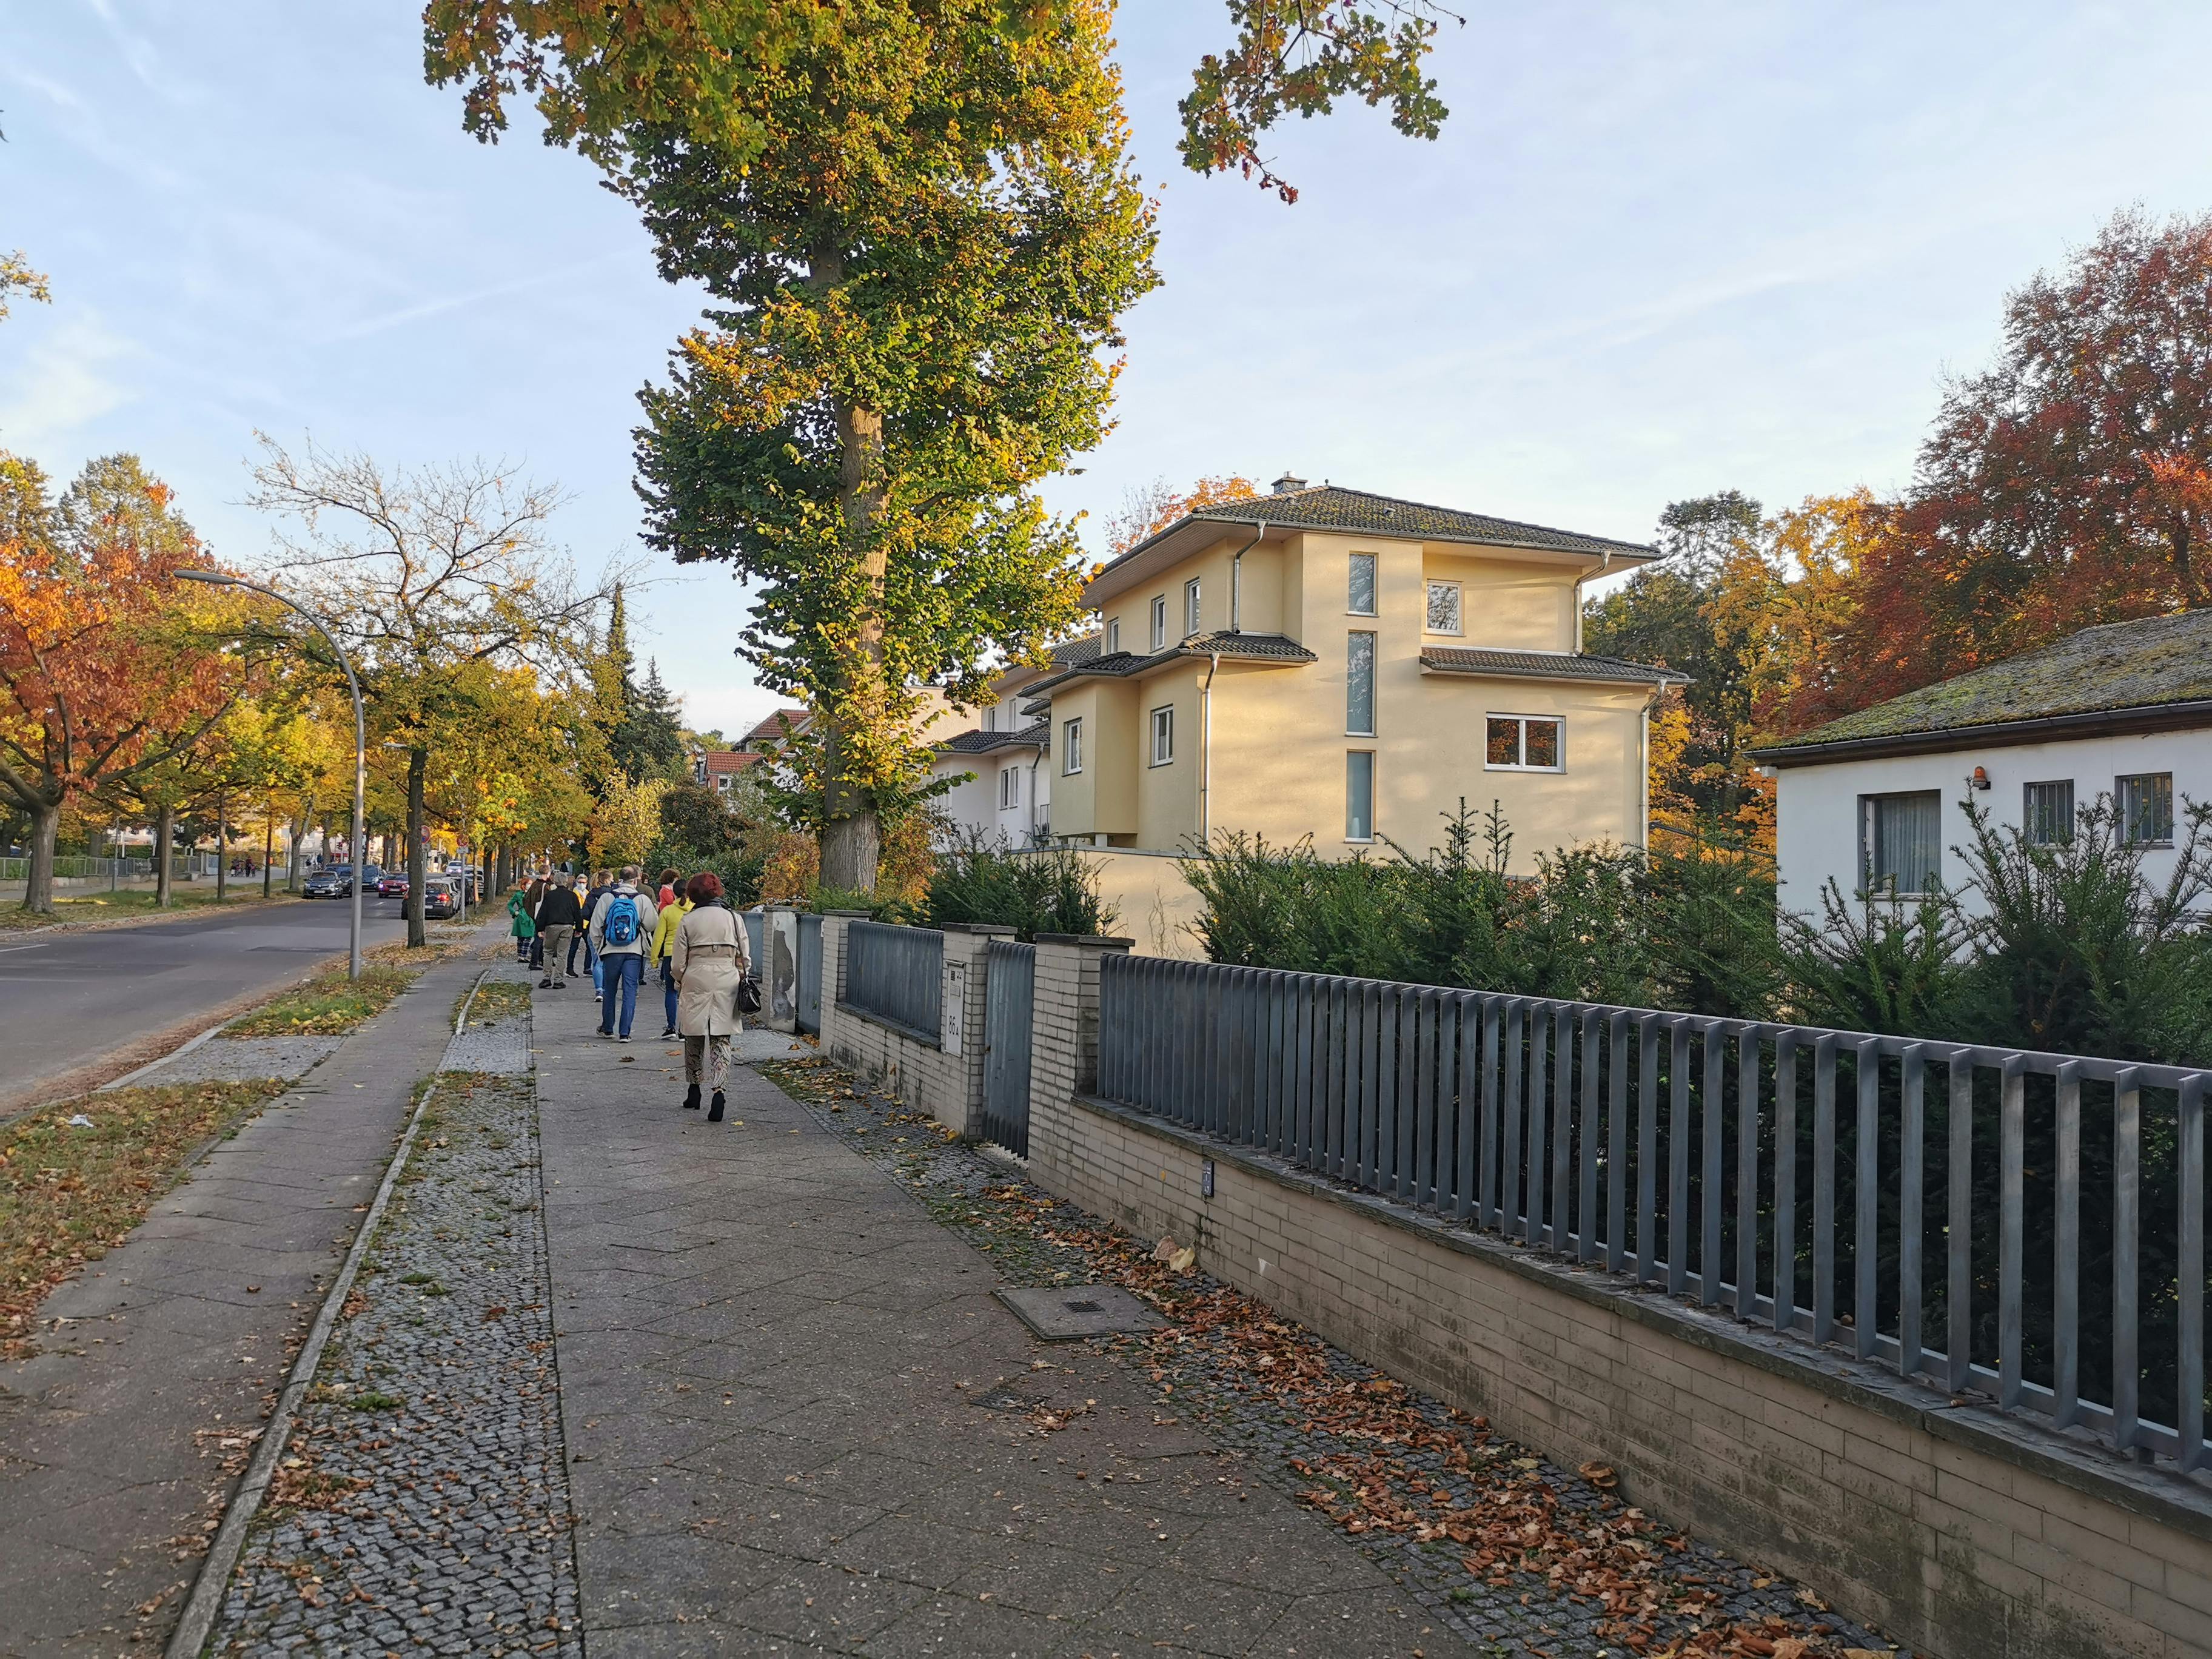 Architectural tour: modern living culture in Zehlendorf